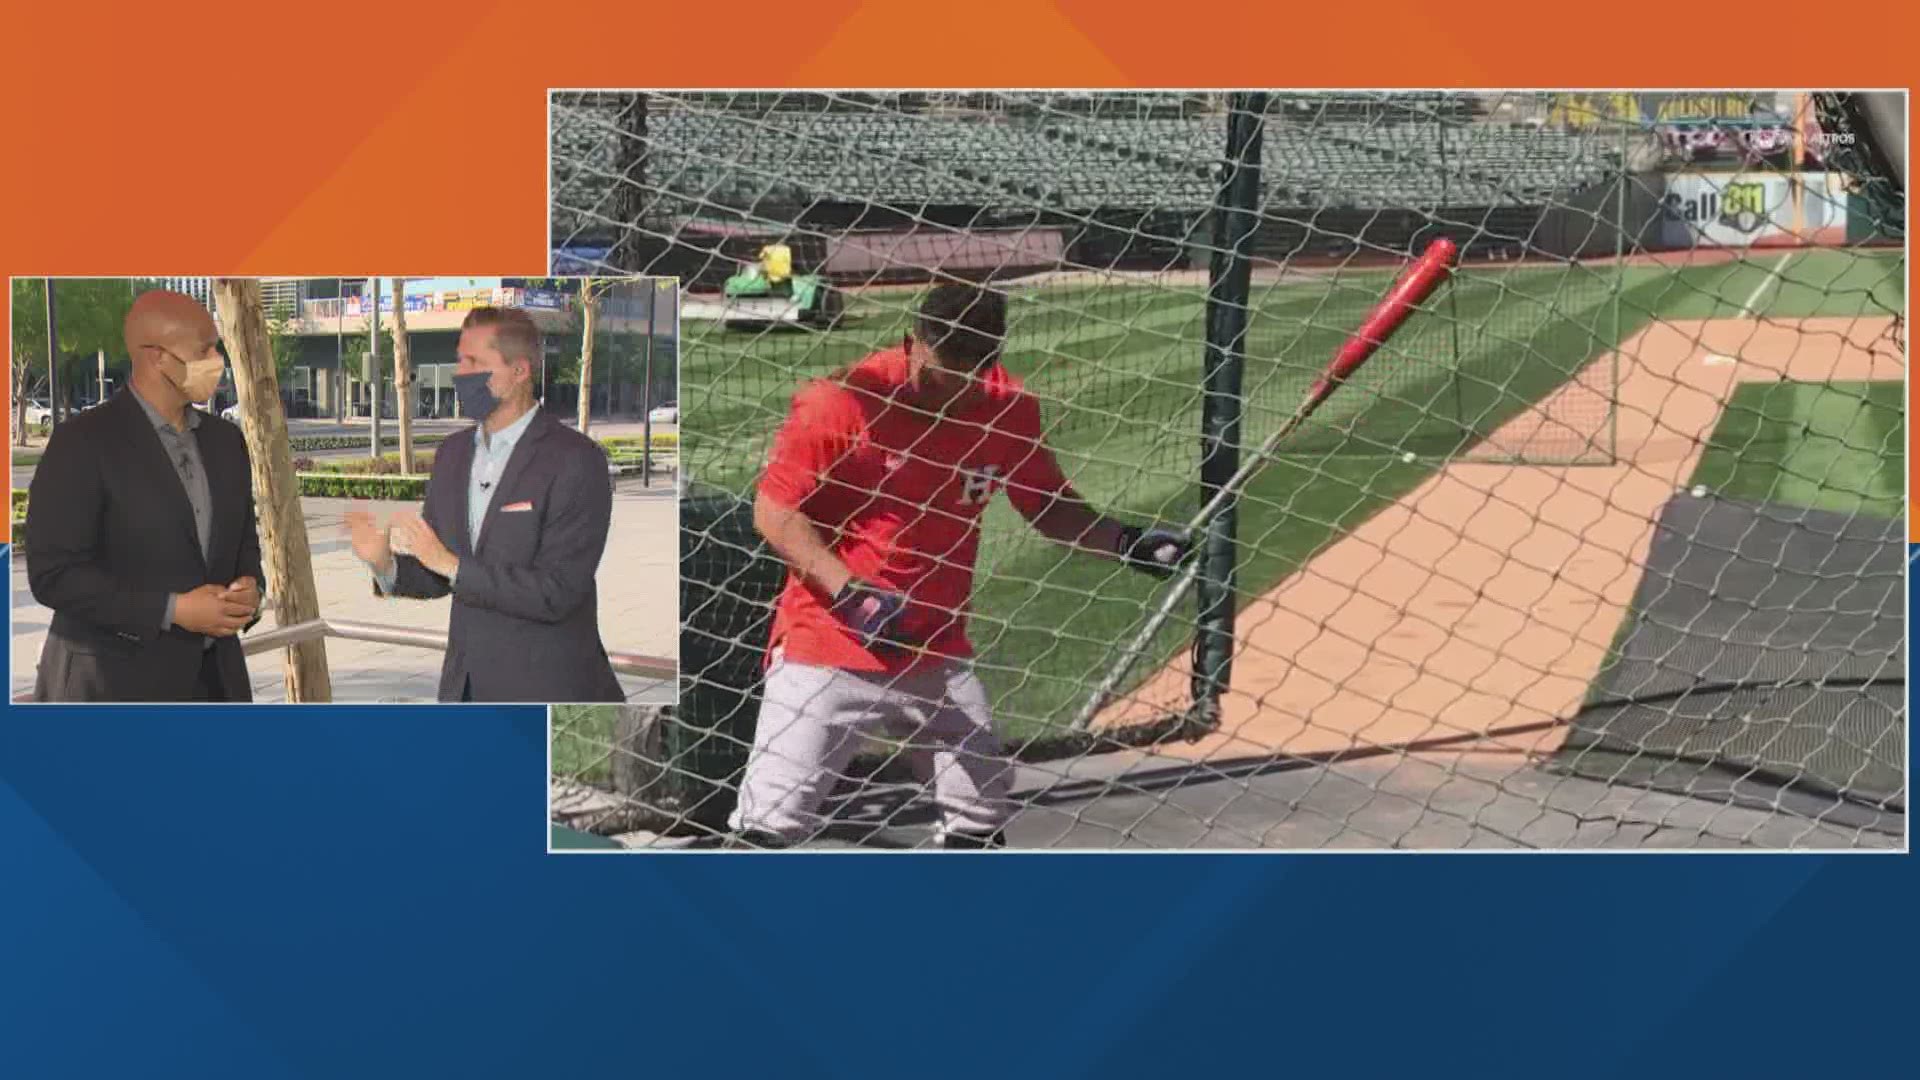 KHOU 11's Jason Bristol and former MLB scout Jeremy Booth weigh in on which Astro will get the loudest ovation from fans as the team returns to Minute Maid Park.